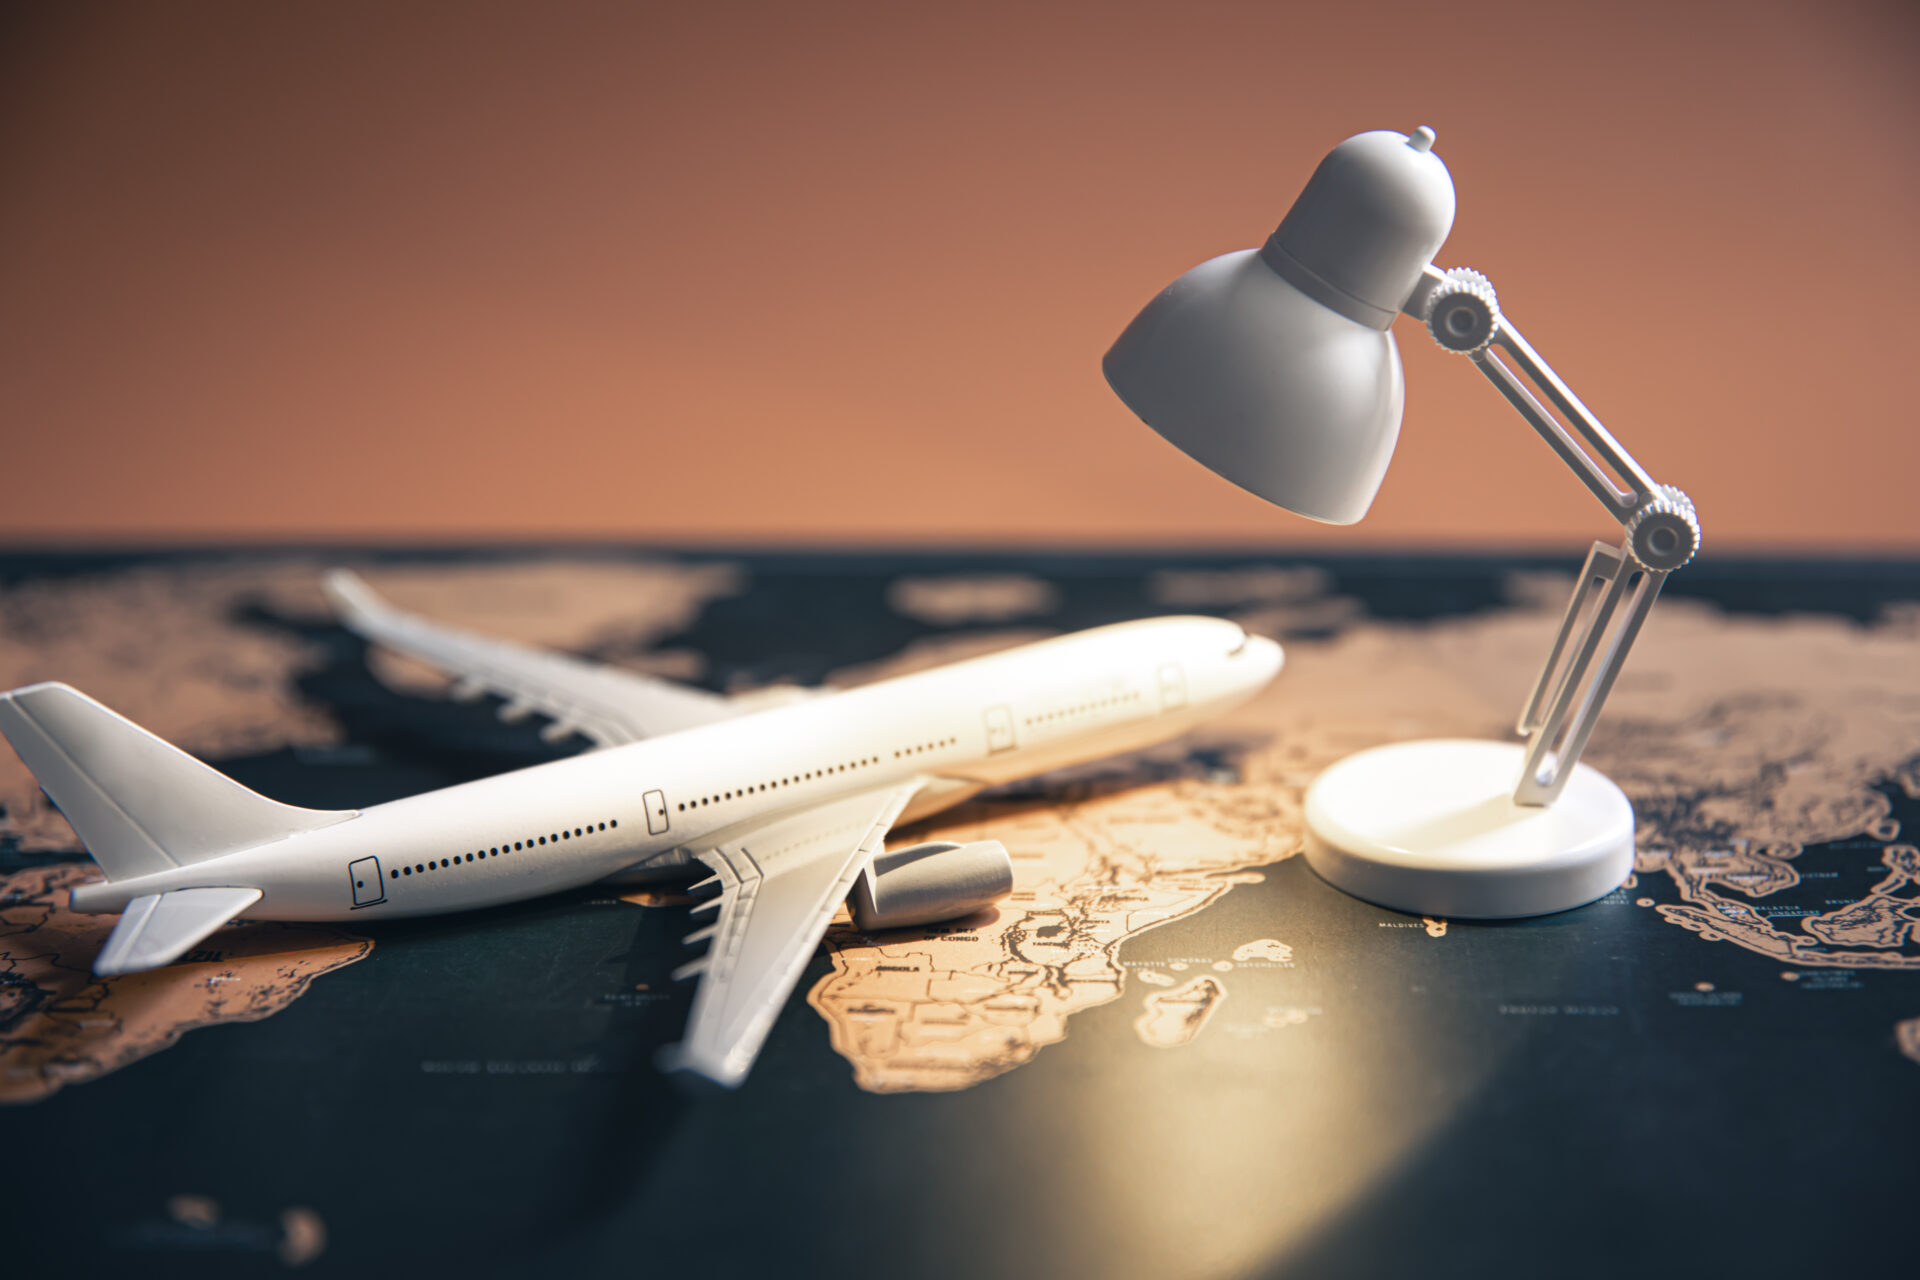 A Small Table Lamp And A Plane On A World Map